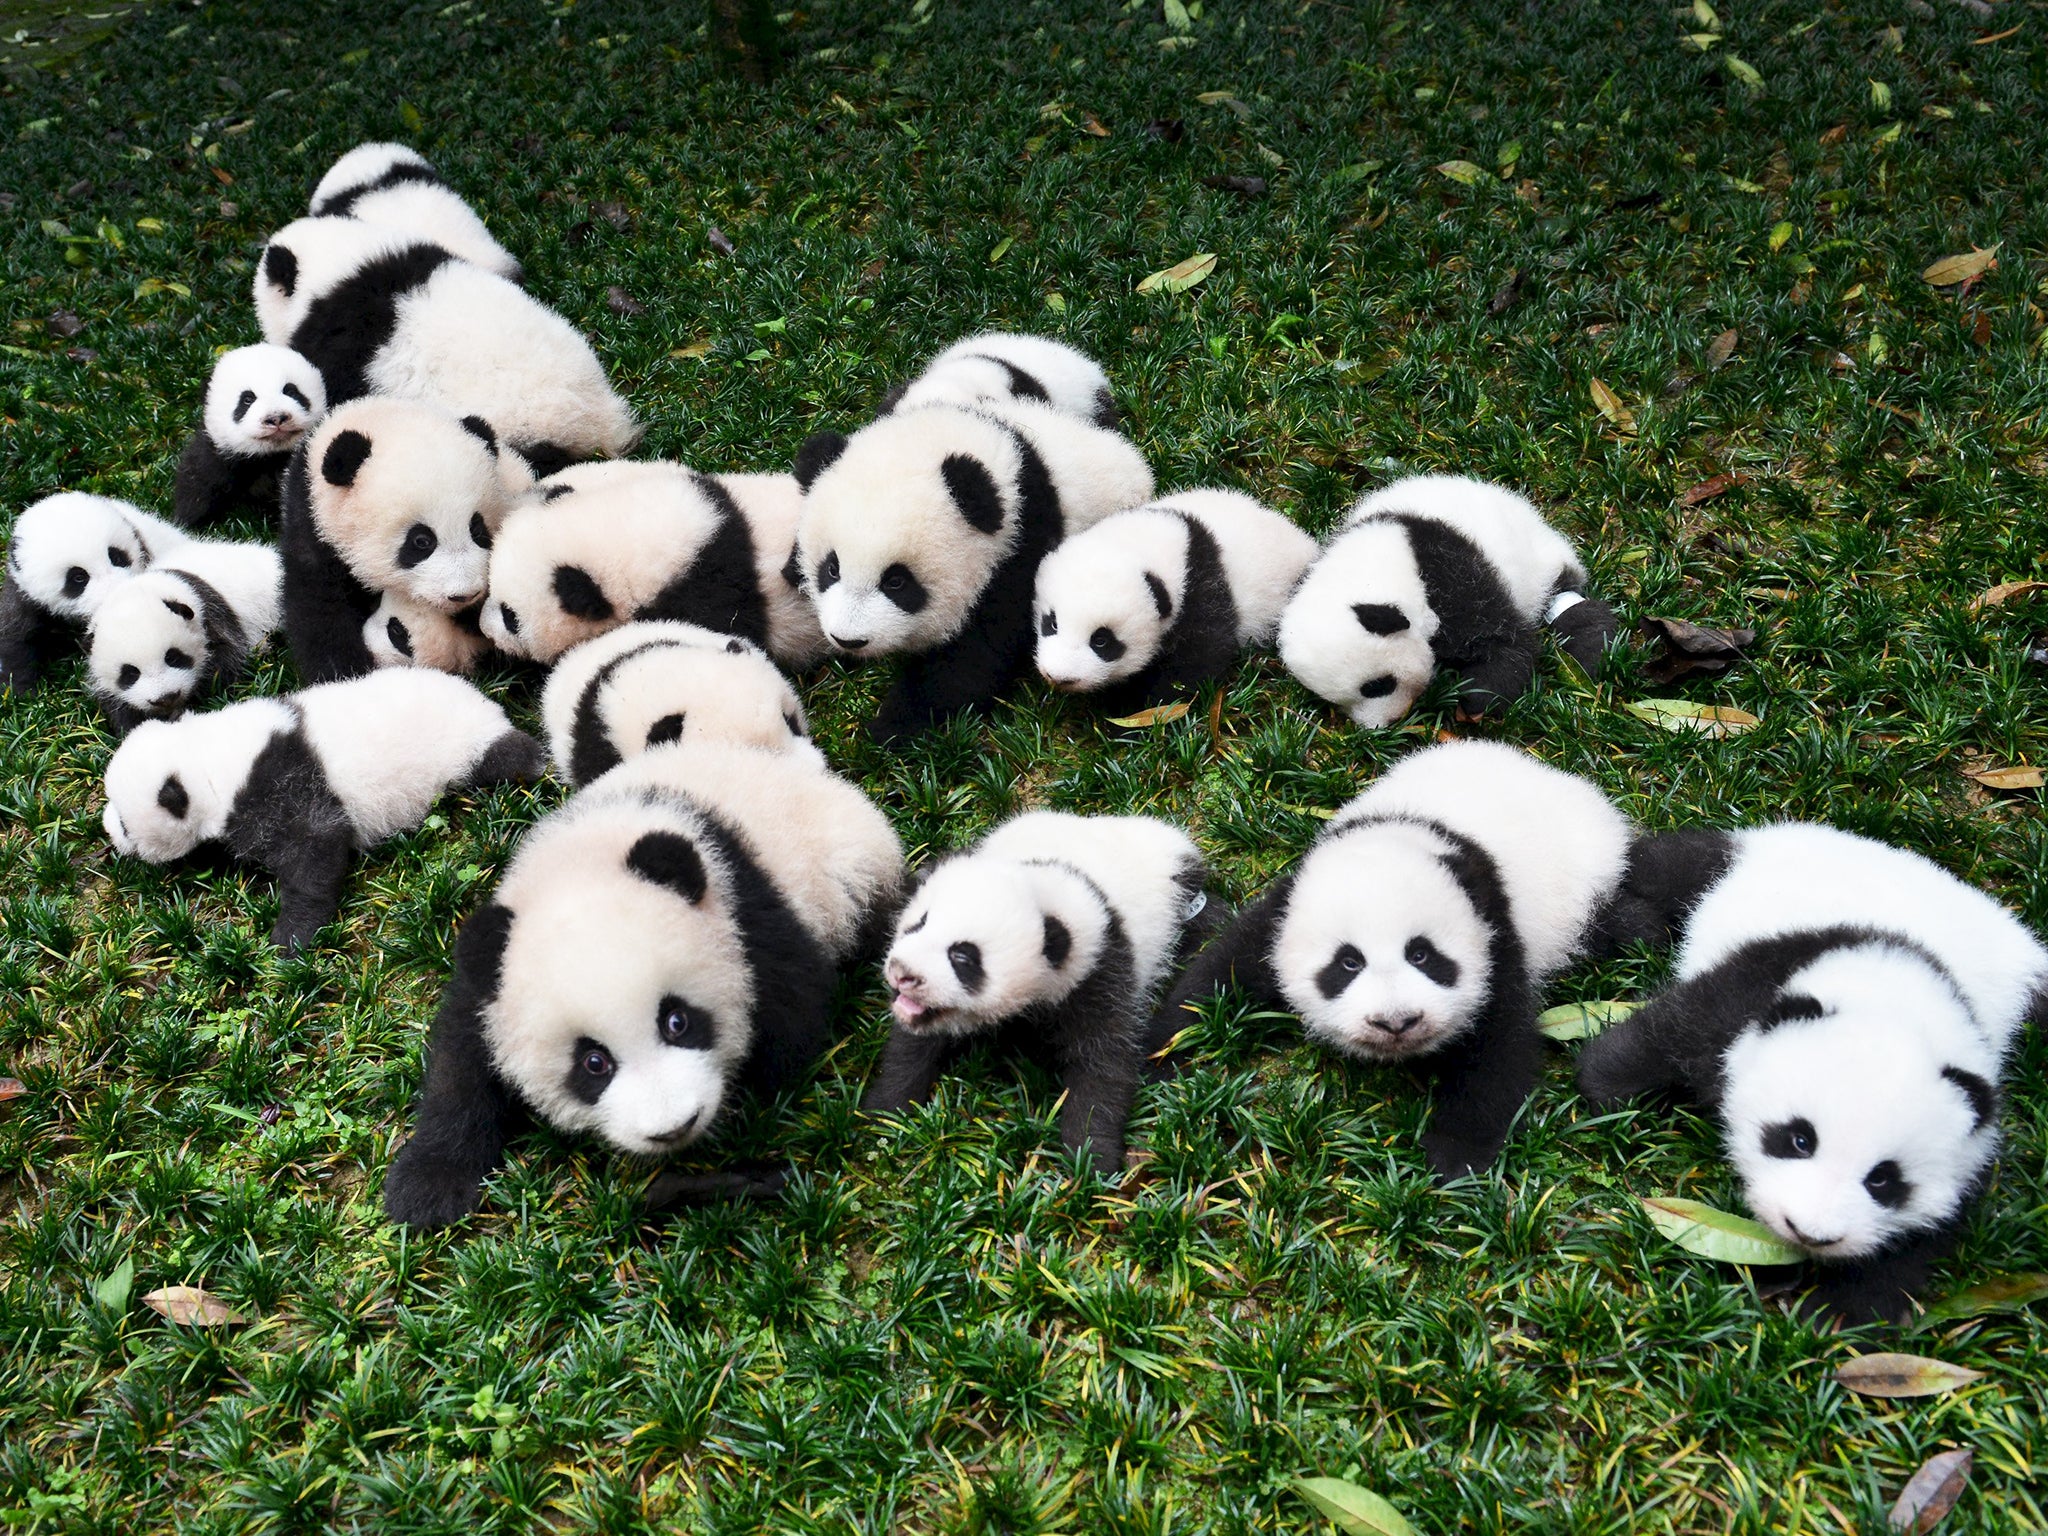 Baby pandas born in 2015 are introduced to the public for the first time at a giant panda breeding centre in Ya'an, Sichuan province, China